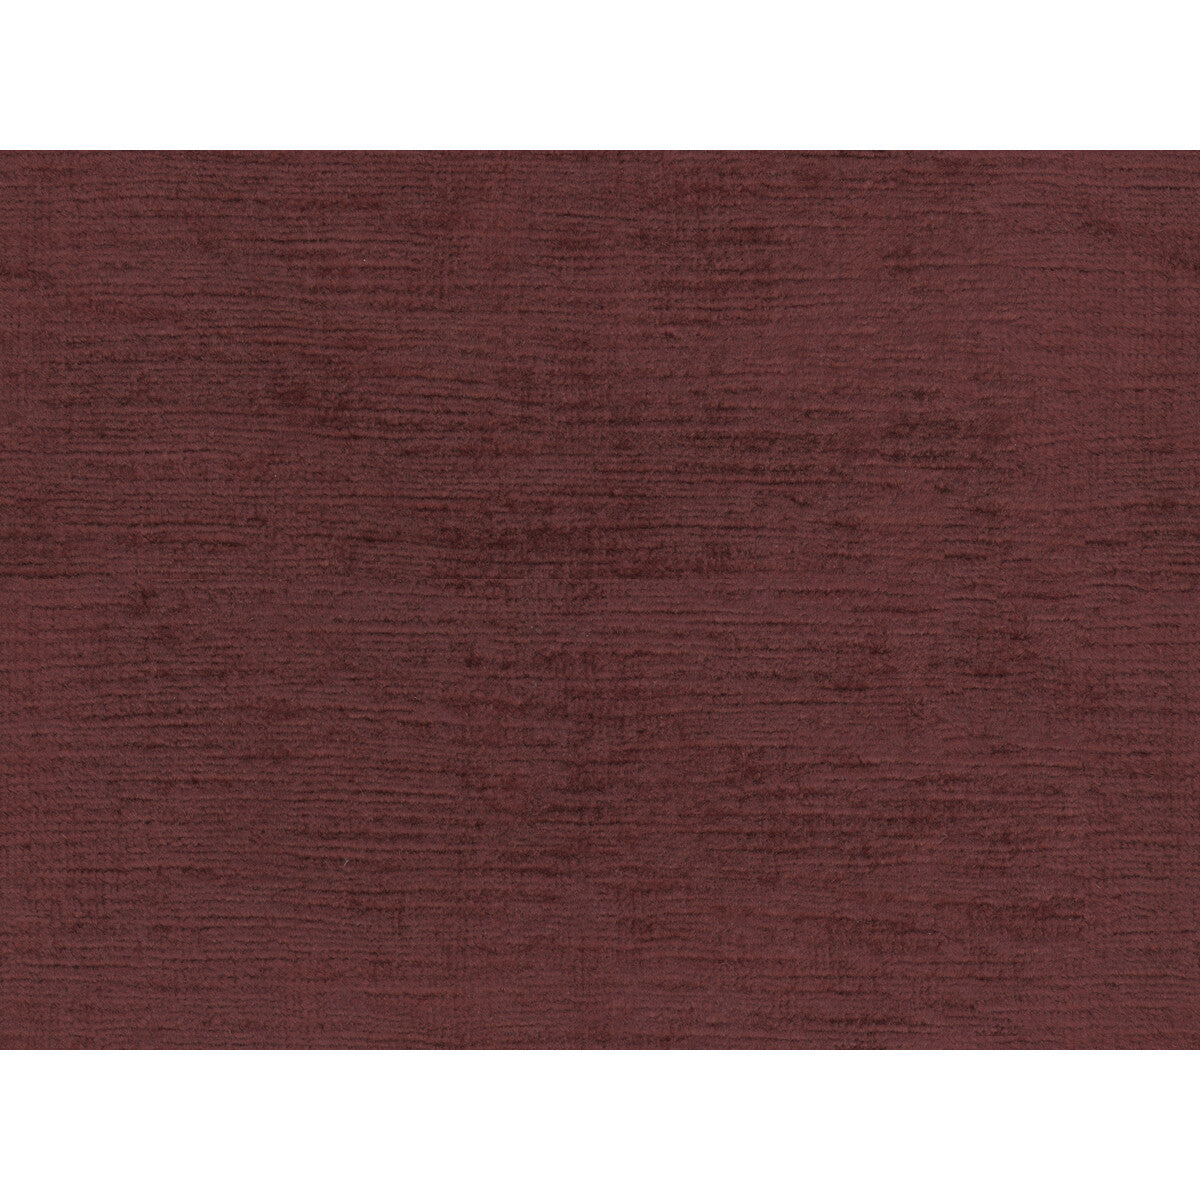 Fulham Linen V fabric in merlot color - pattern 2016133.1910.0 - by Lee Jofa